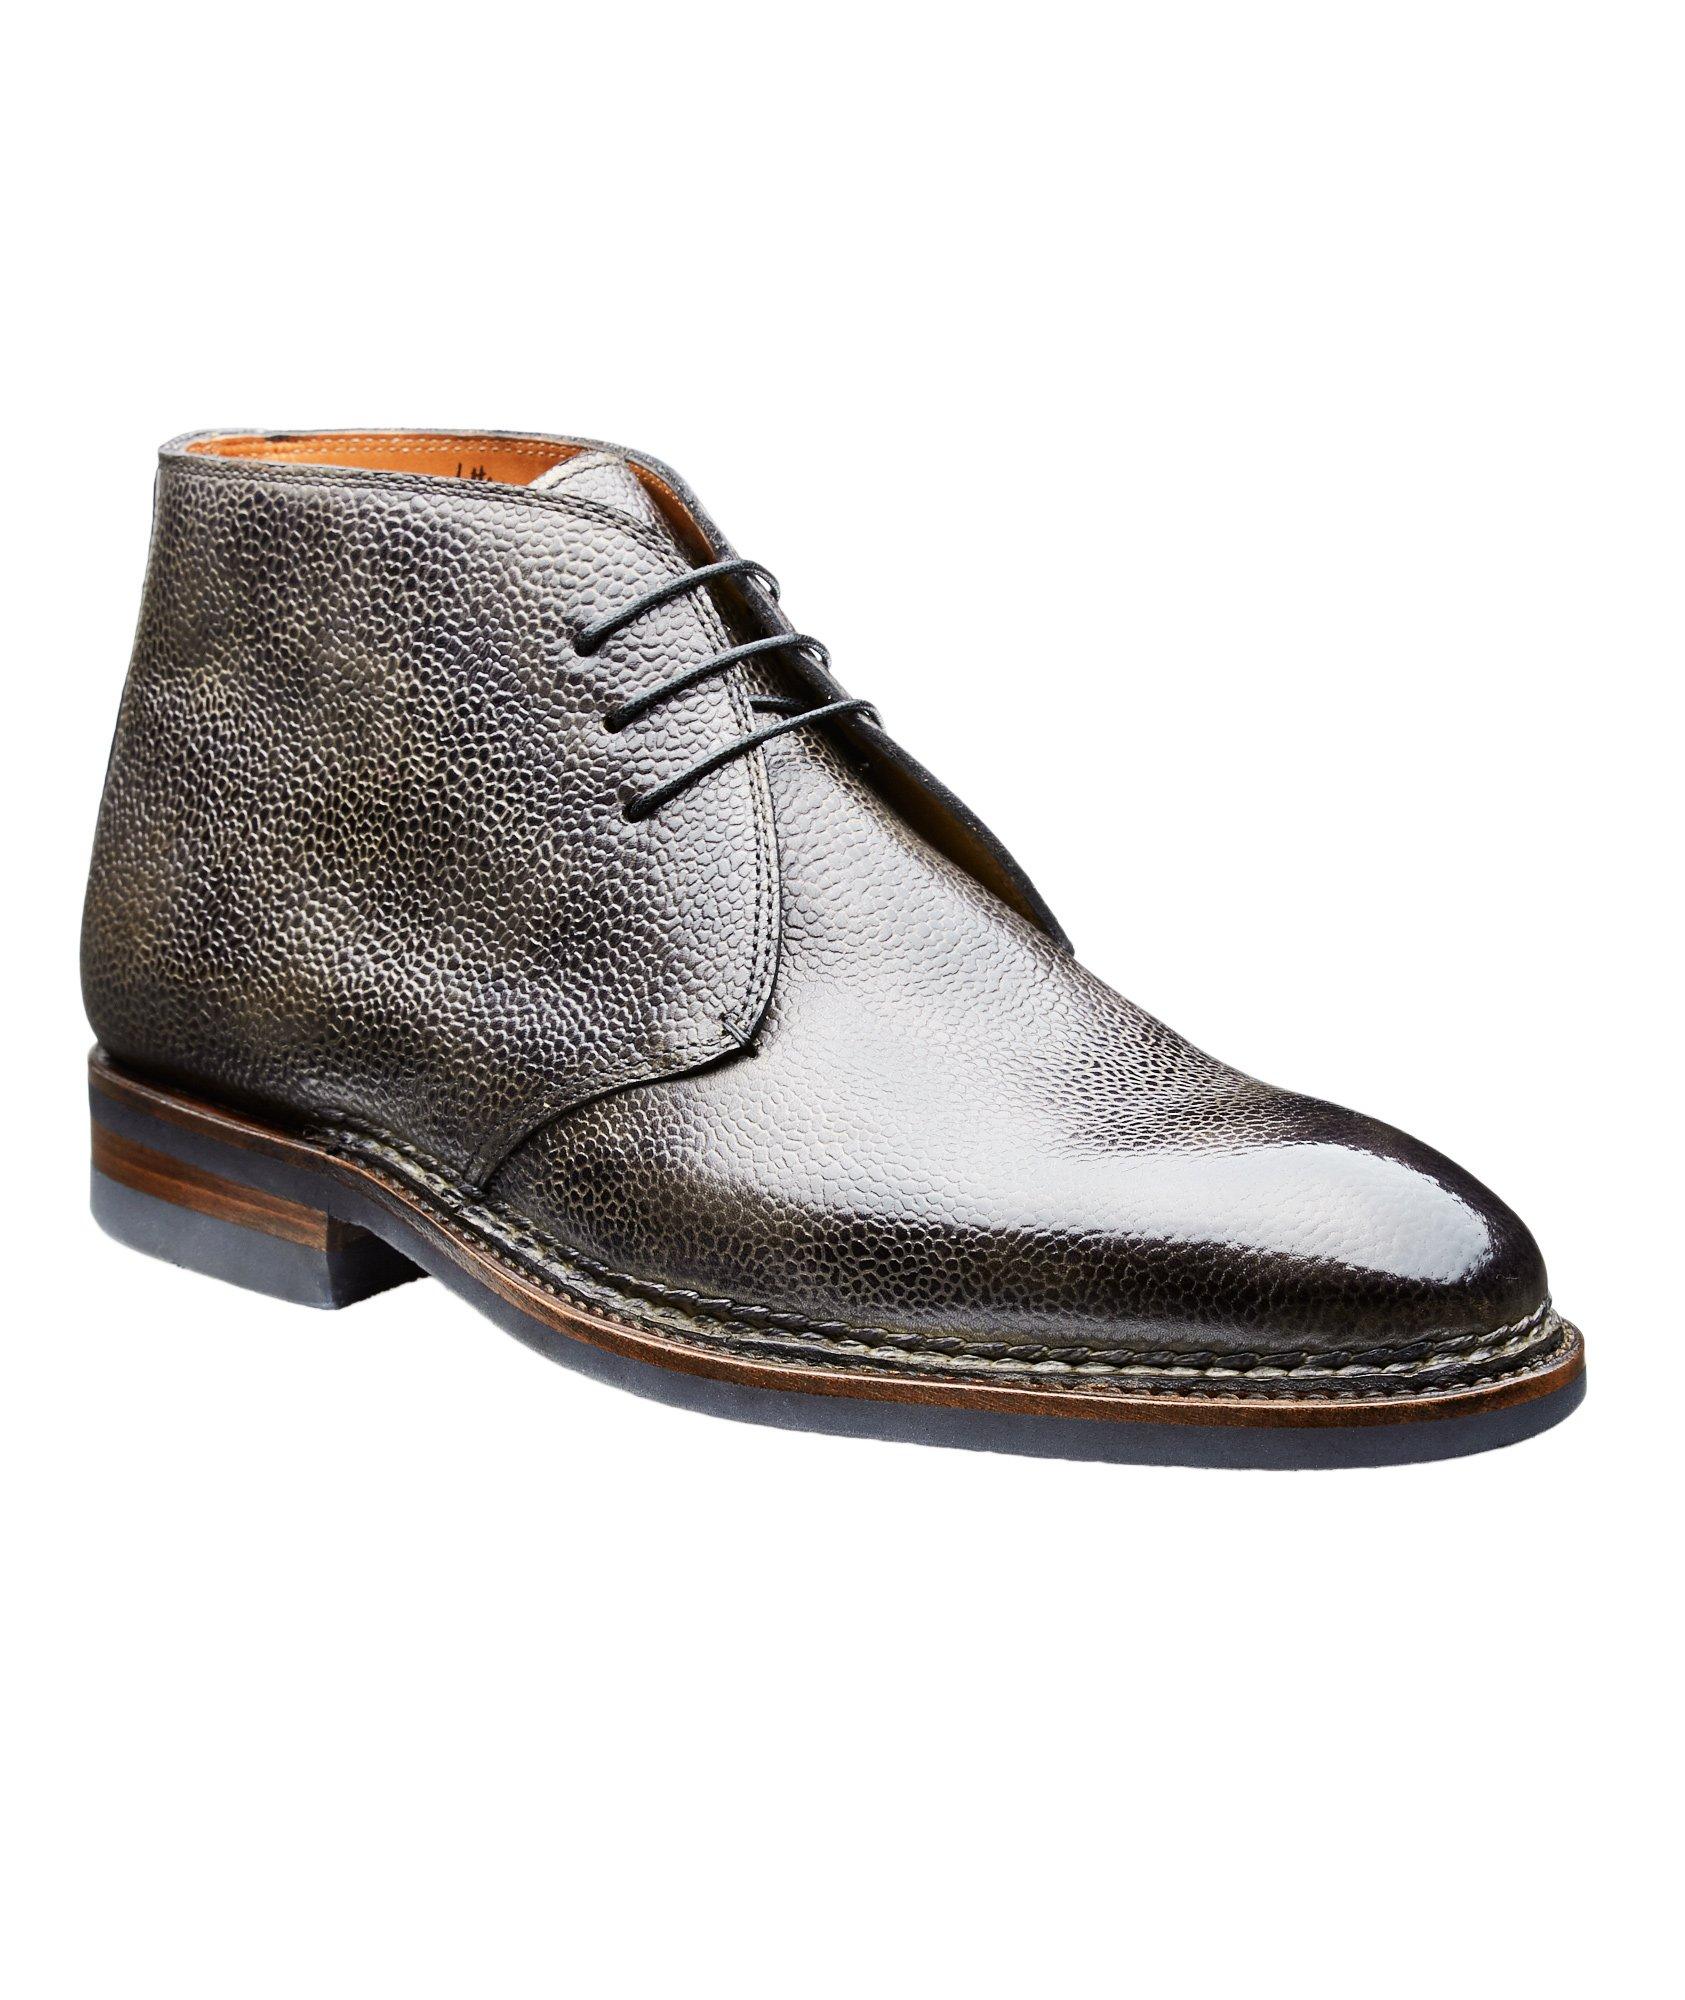 Pebbled Leather Desert Boots image 0